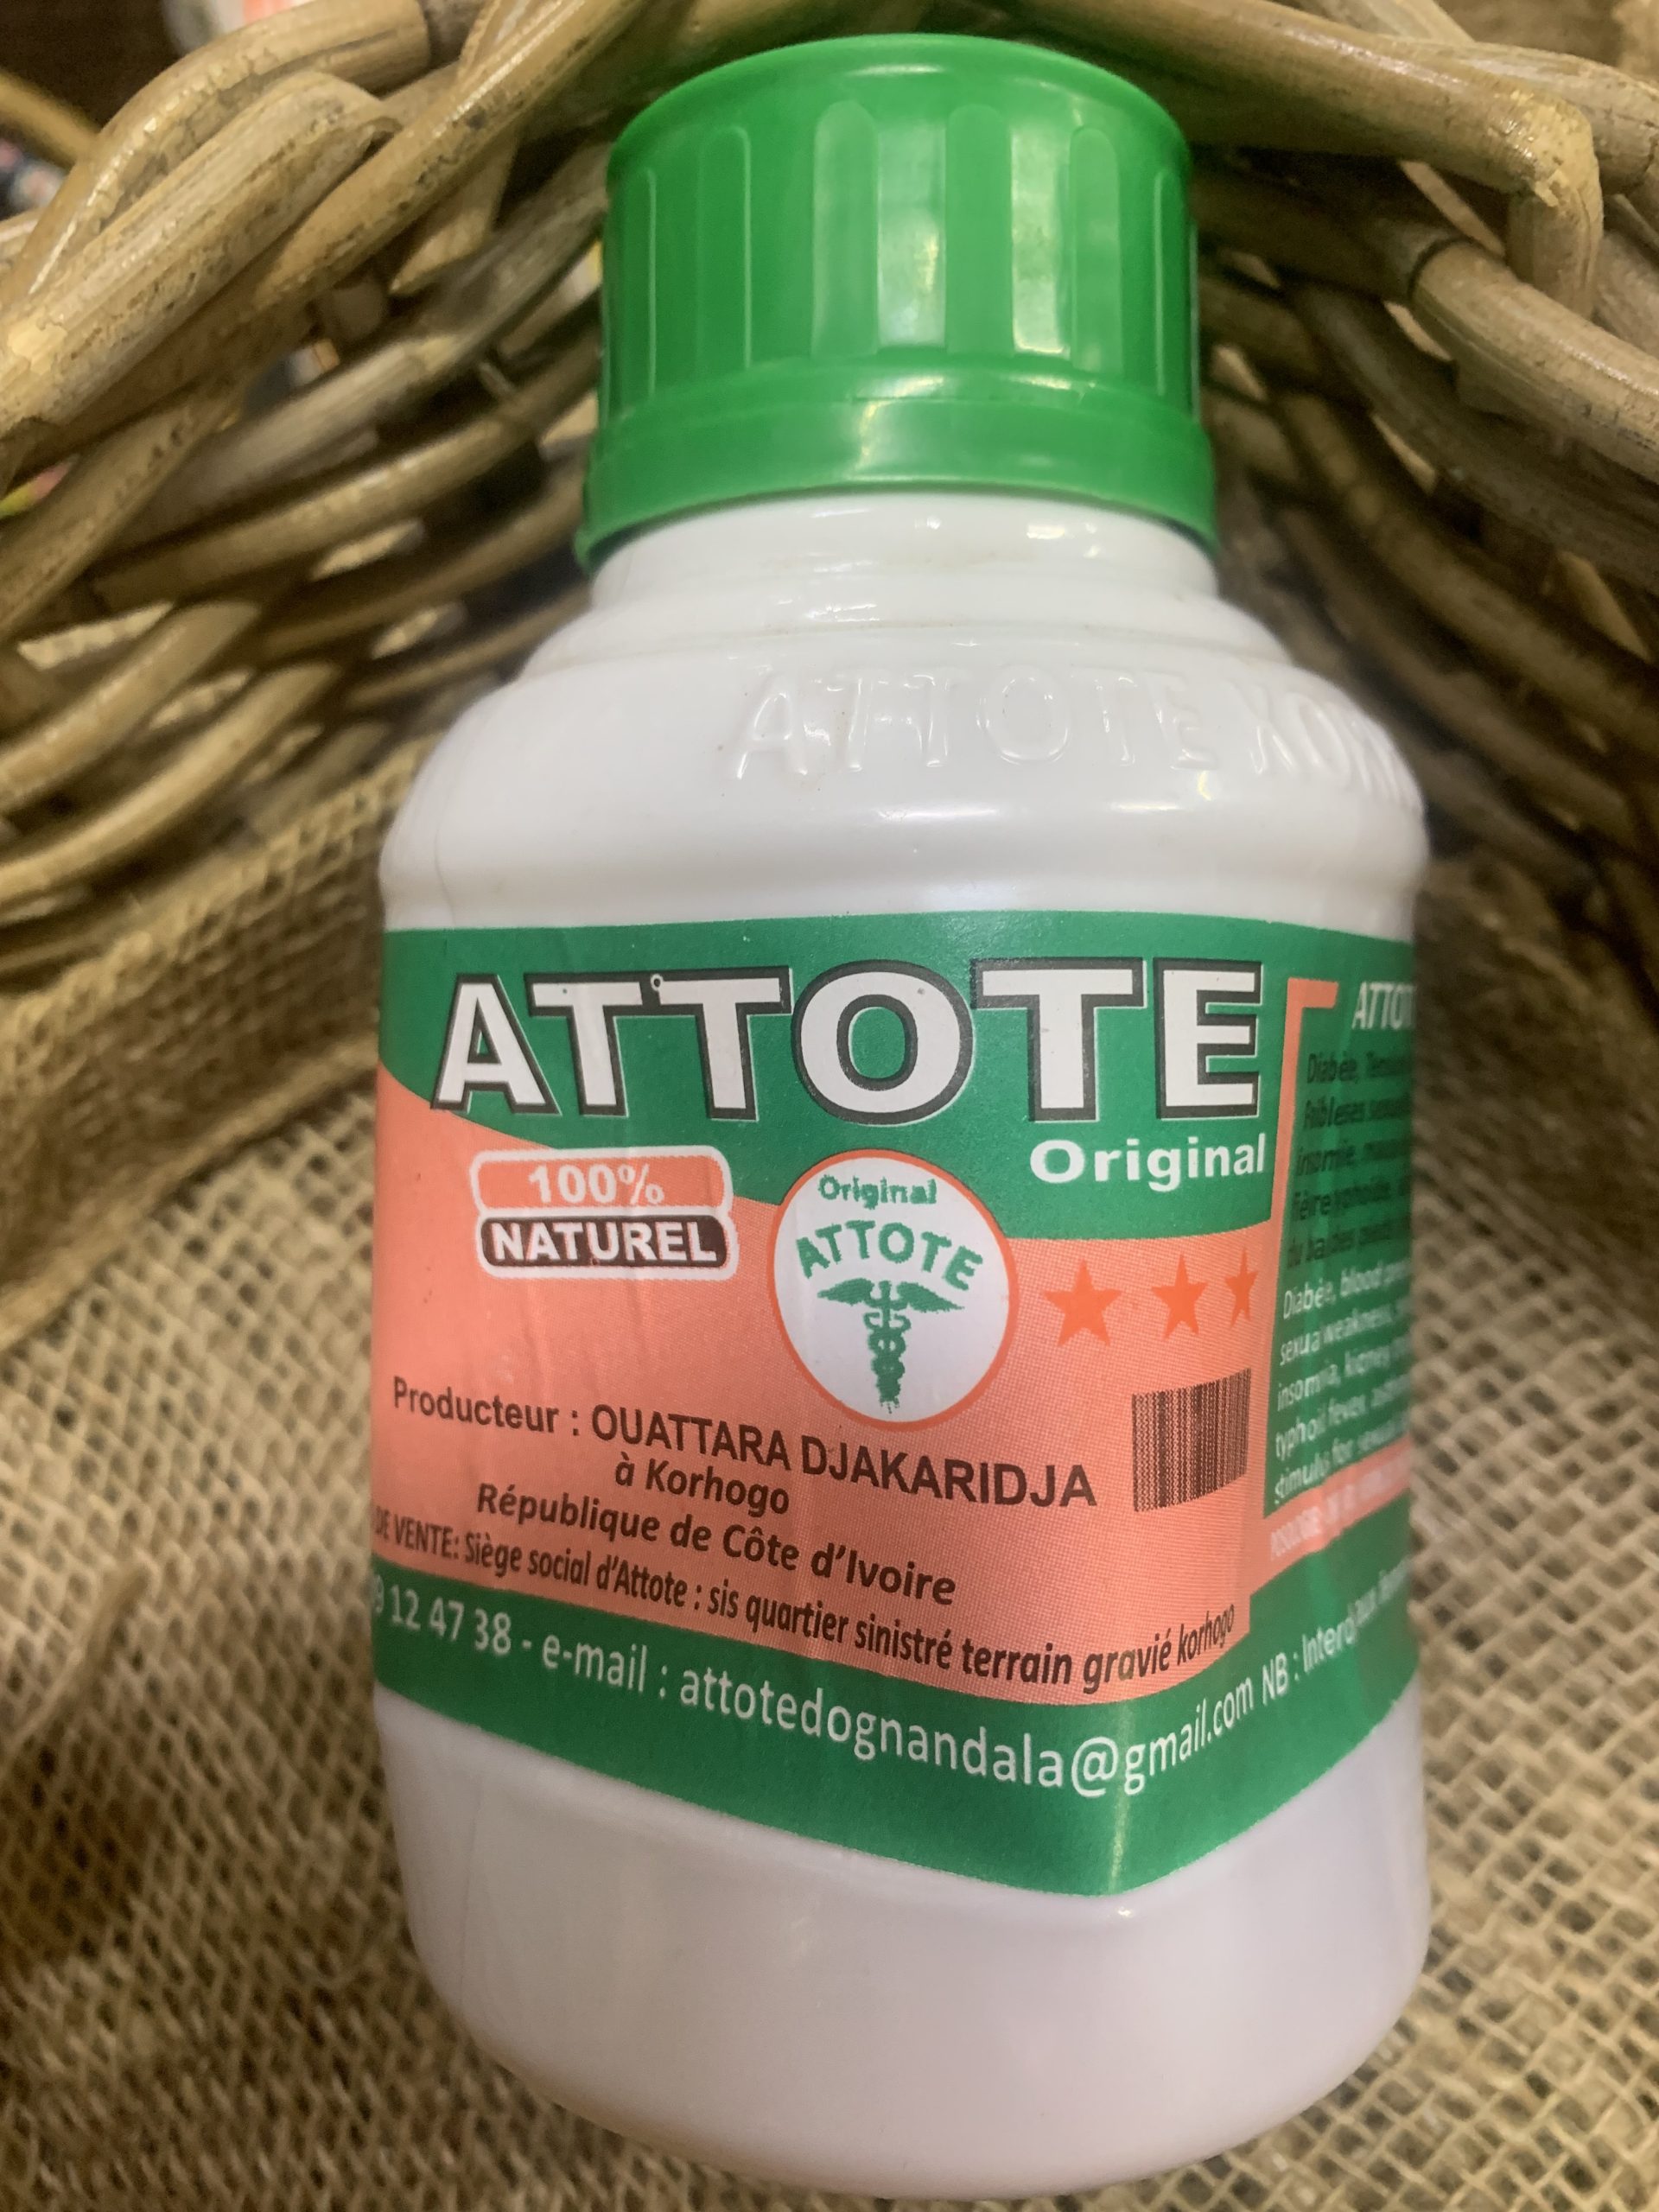 AFRICAN ATTOTE FOR DETOX & ENERGY BOOSTER – Foureras Natural Beauty